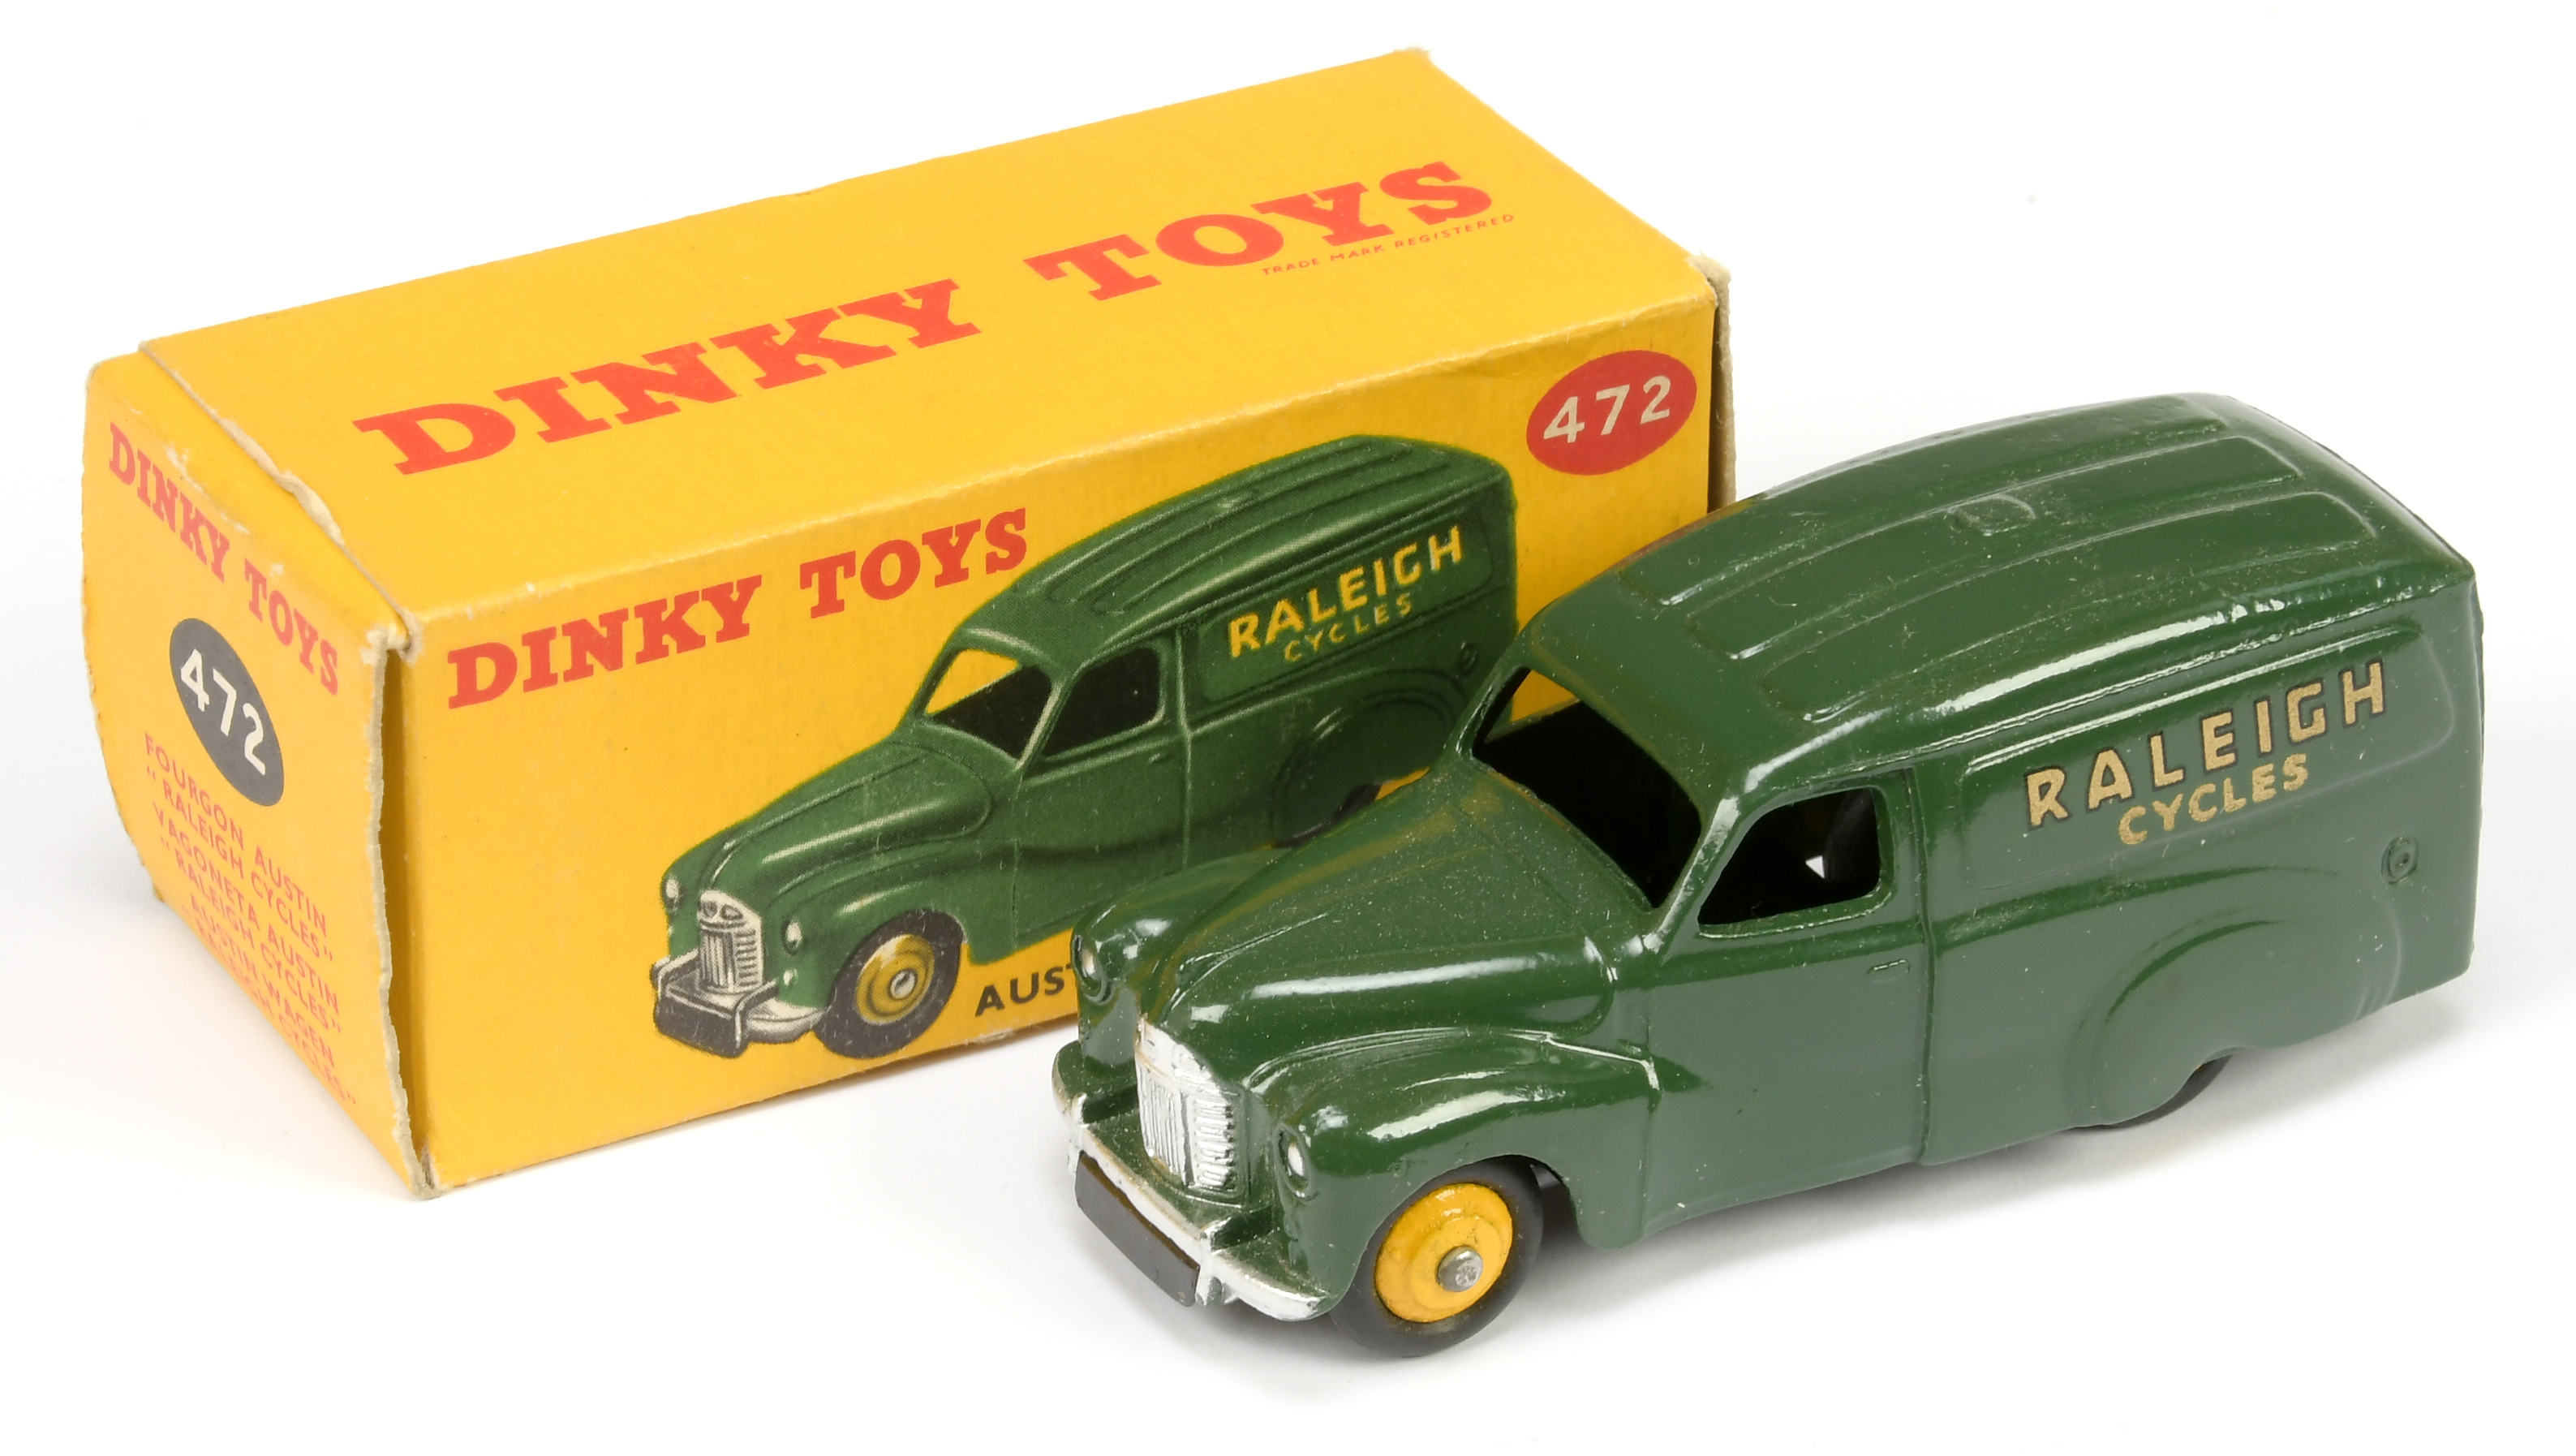 Dinky 472 Austin Van "Raleigh Cycles " green with yellow